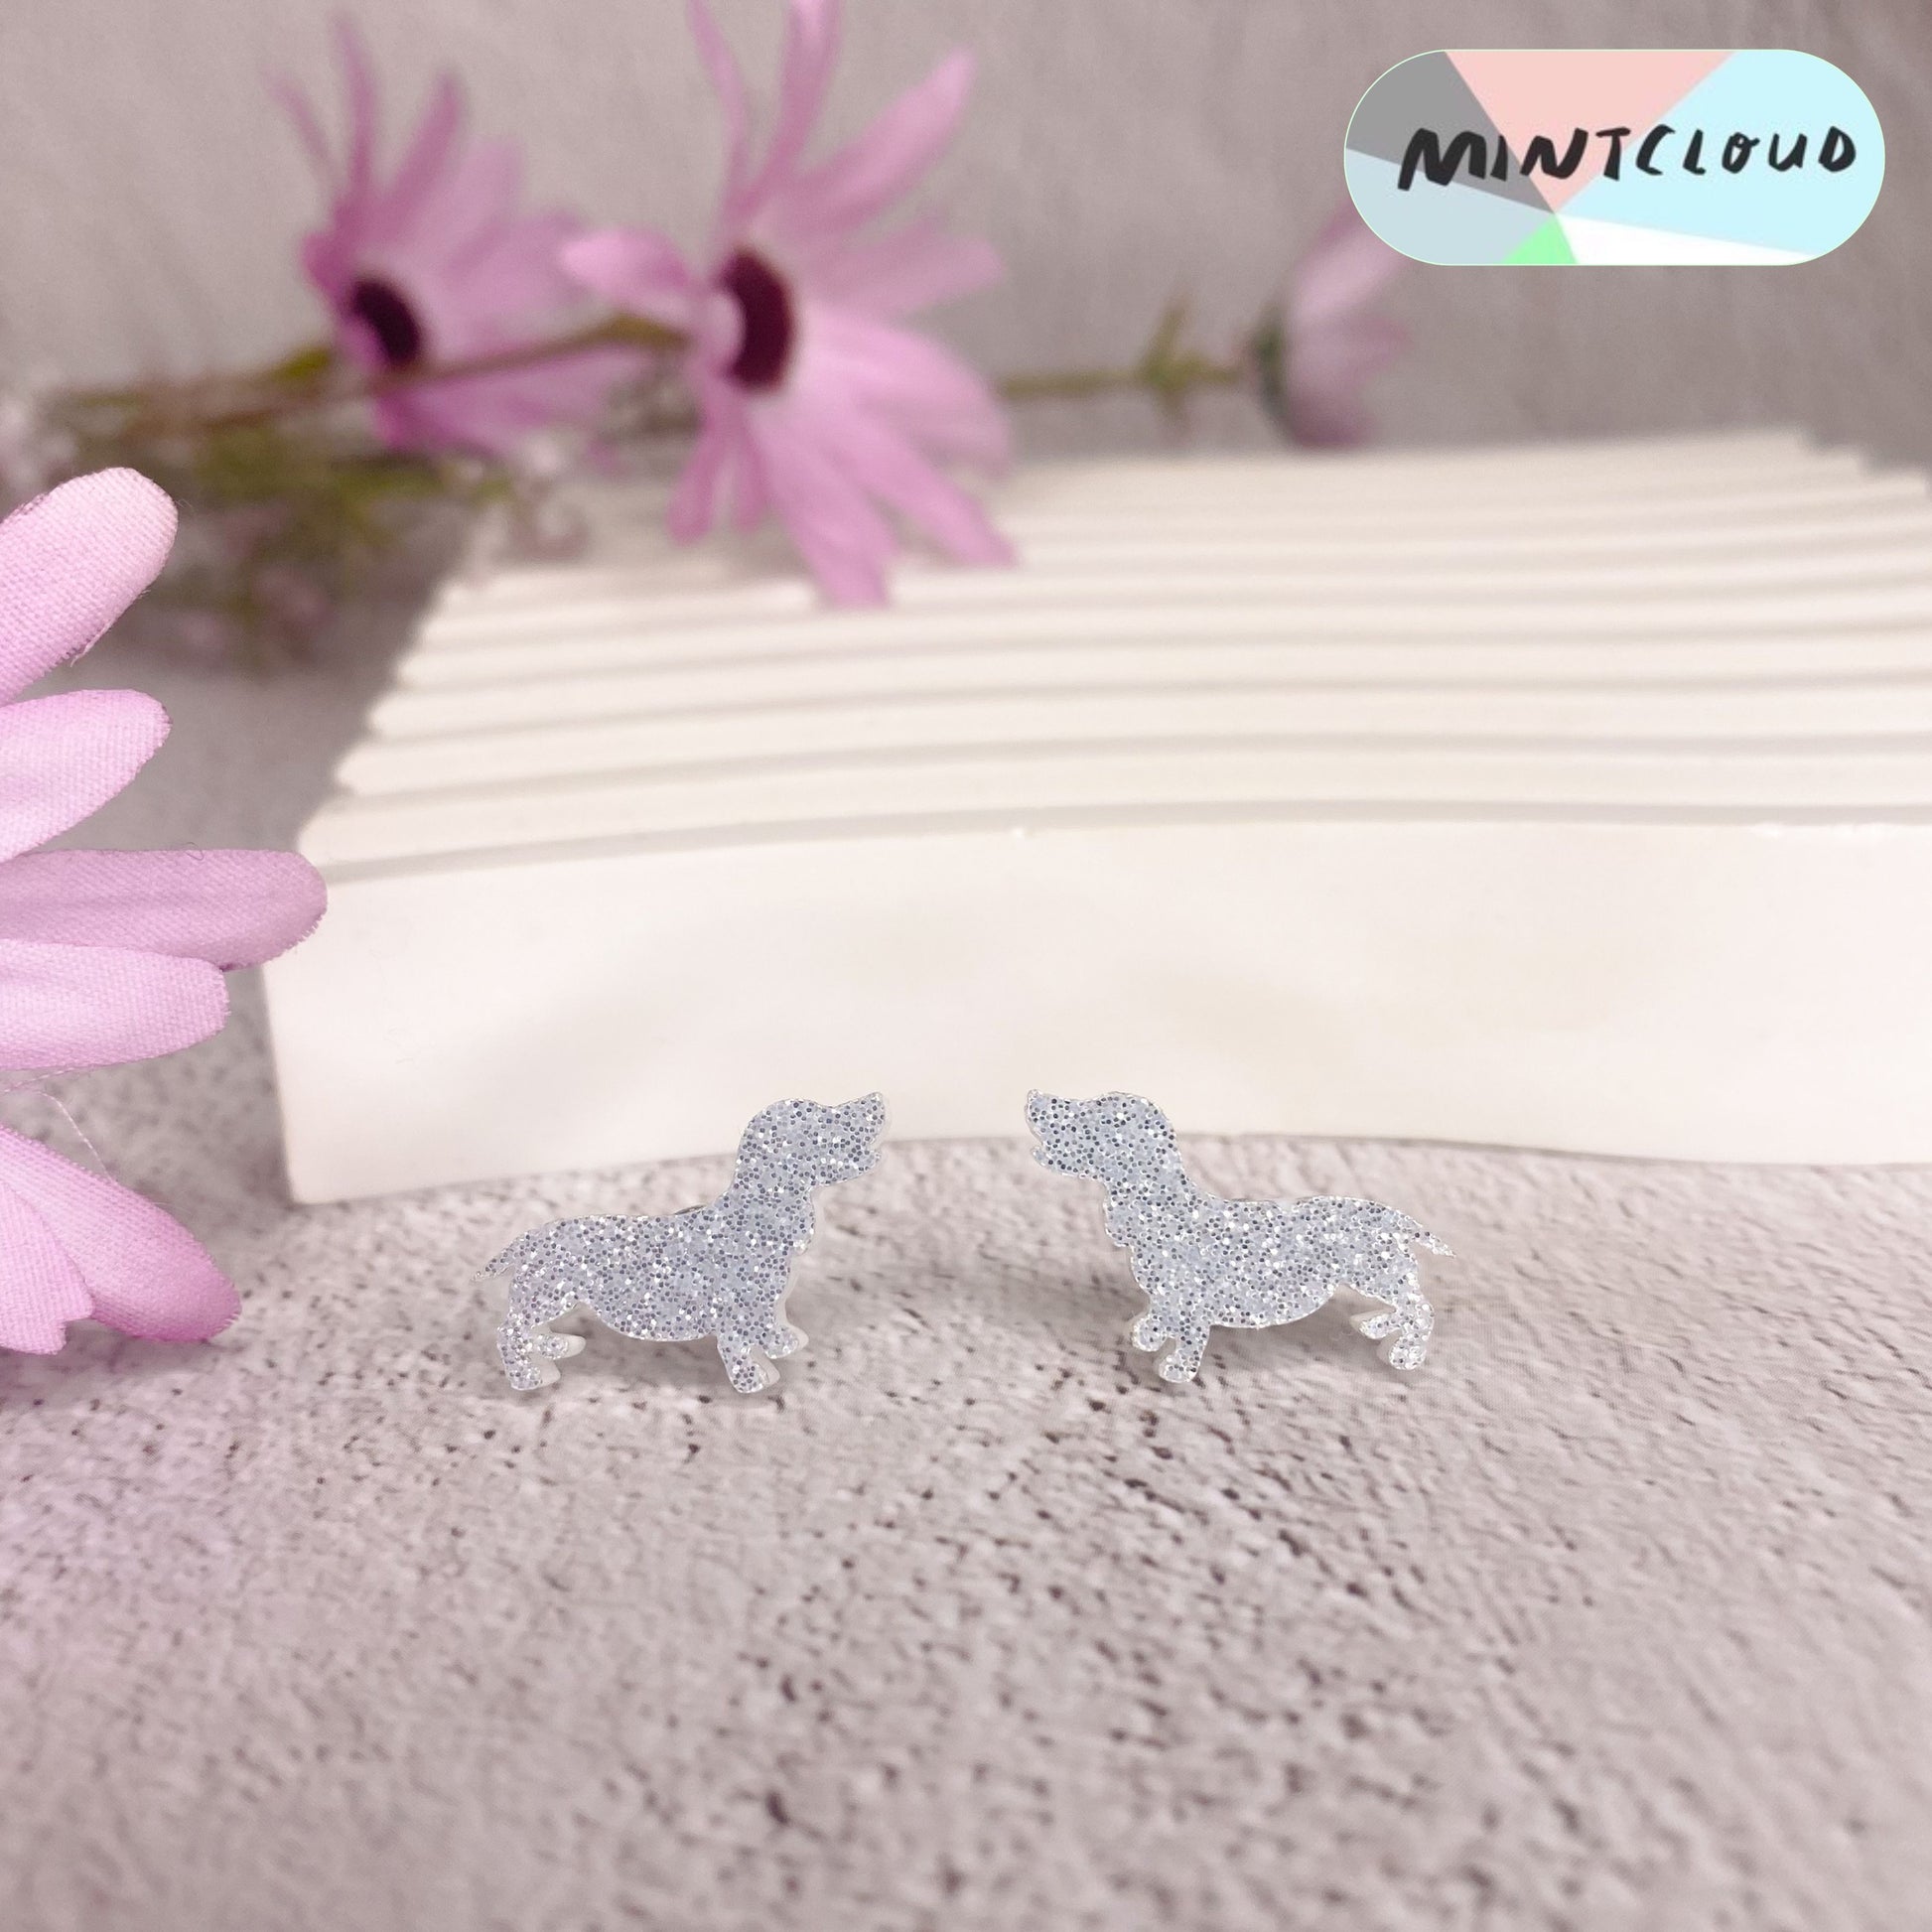 Dachshund Studs - Various Colours From Mintcloud Studio, an online jewellery store based in Adelaide South Australia